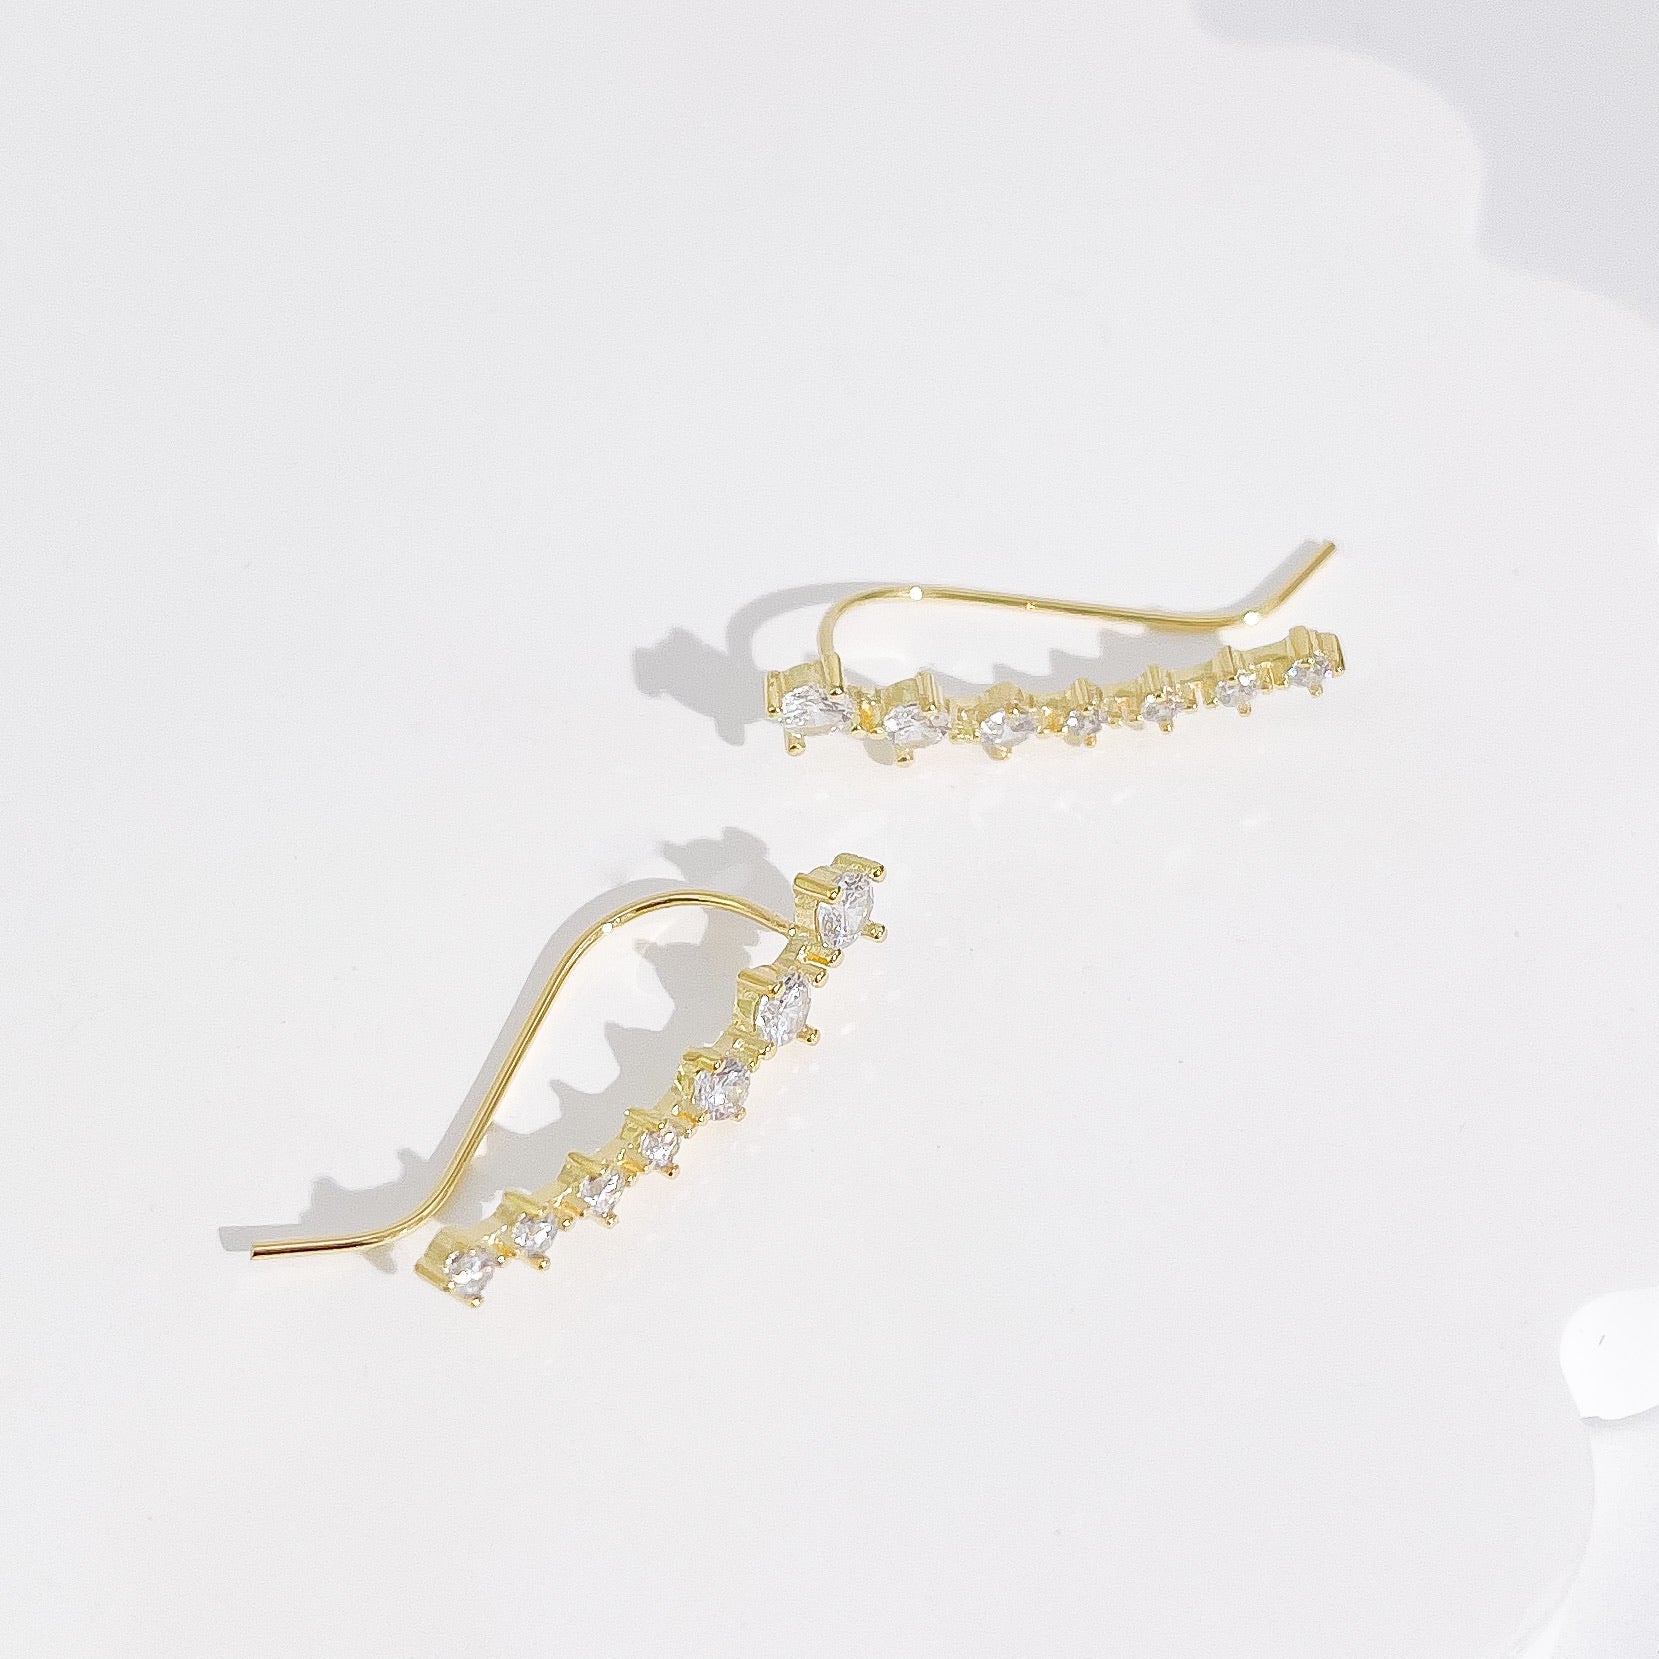 Kaylee Sterling Ear Climbers in Gold - Flaire & Co.